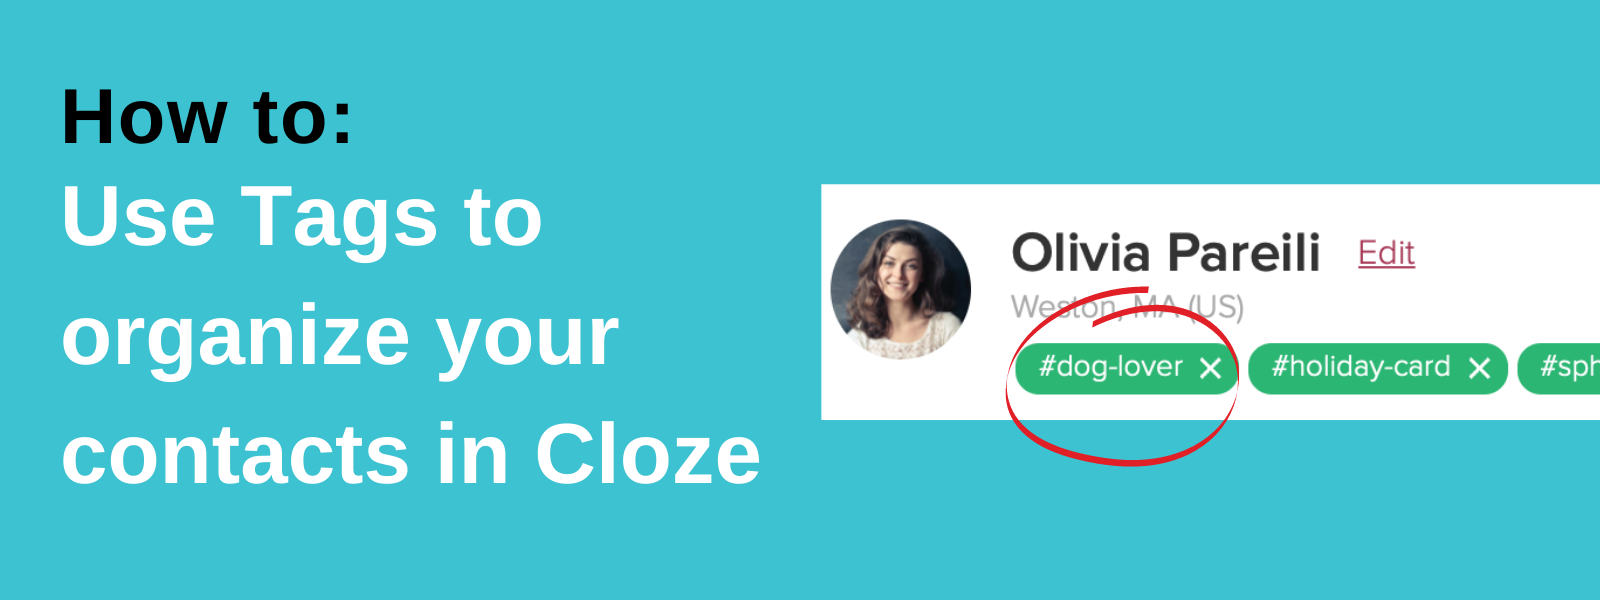 How to use Cloze CRM to organize contacts with Tags.